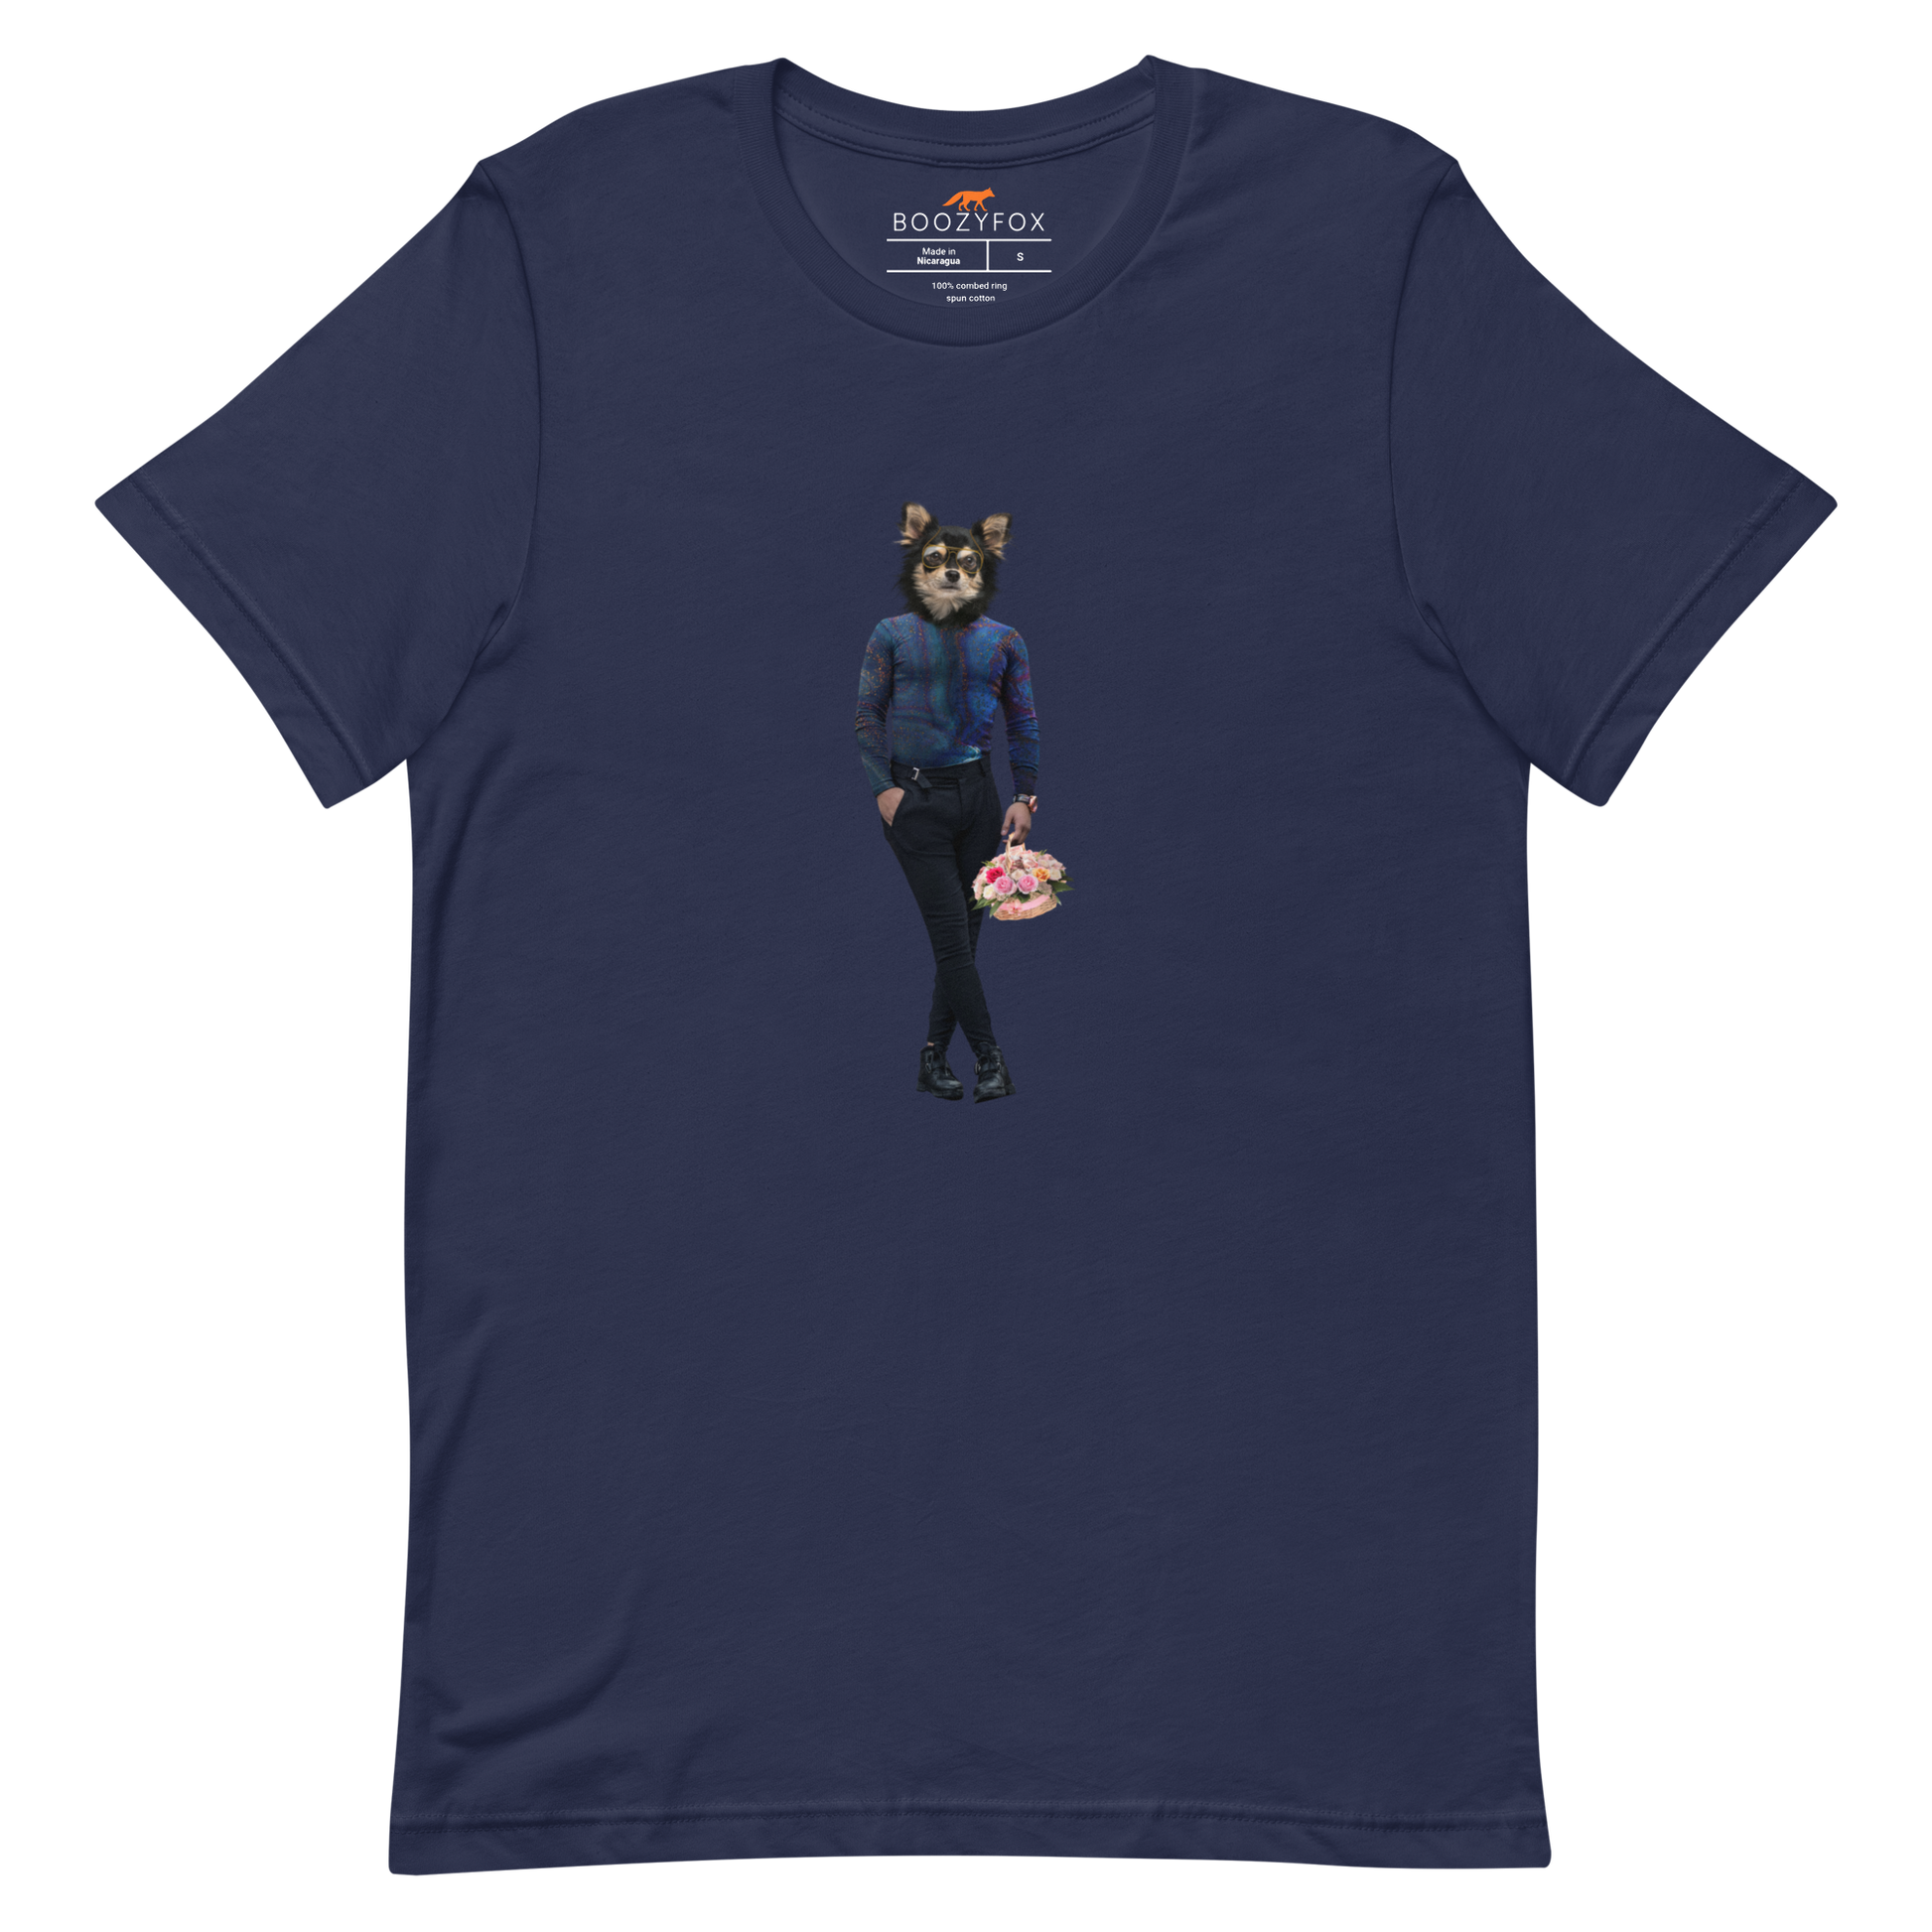 Navy Premium Dog T-Shirt featuring an Anthropomorphic Dog graphic on the chest - Funny Graphic Dog Tees - Boozy Fox